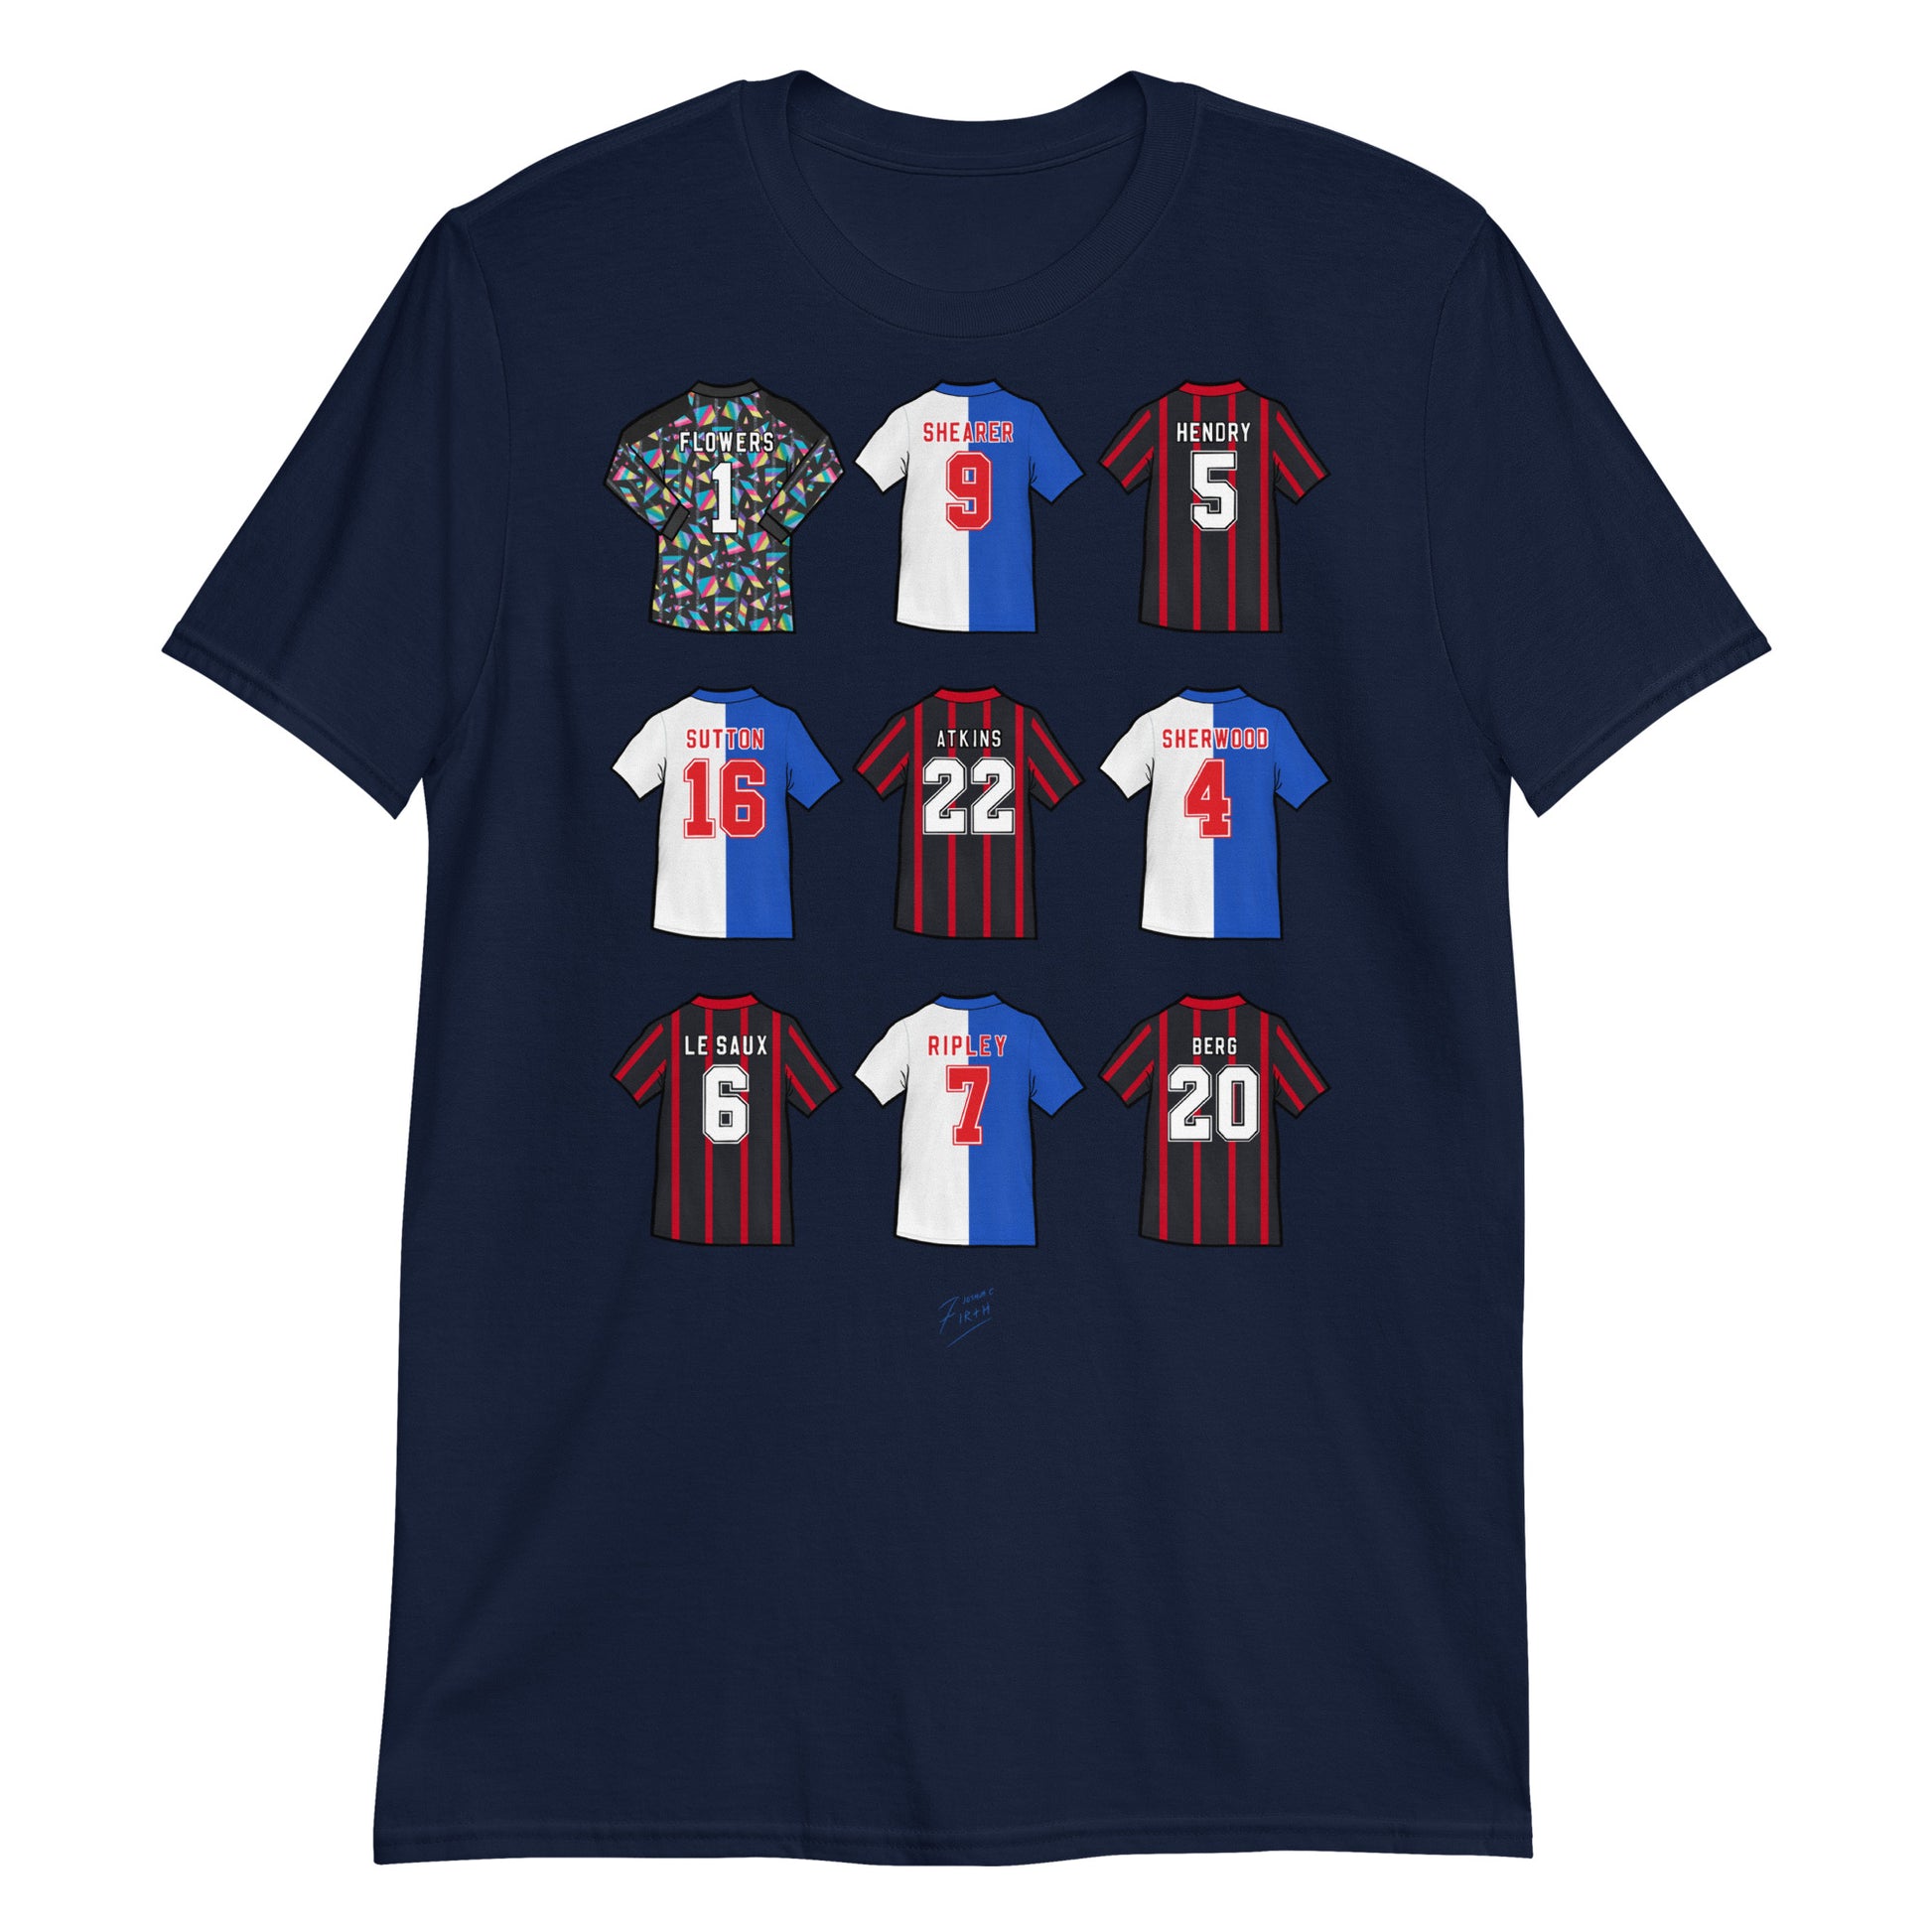 Blue T-shirt inspired by the legendary Blackburn Rovers players of the past! A great tribute to that team of 1994/95